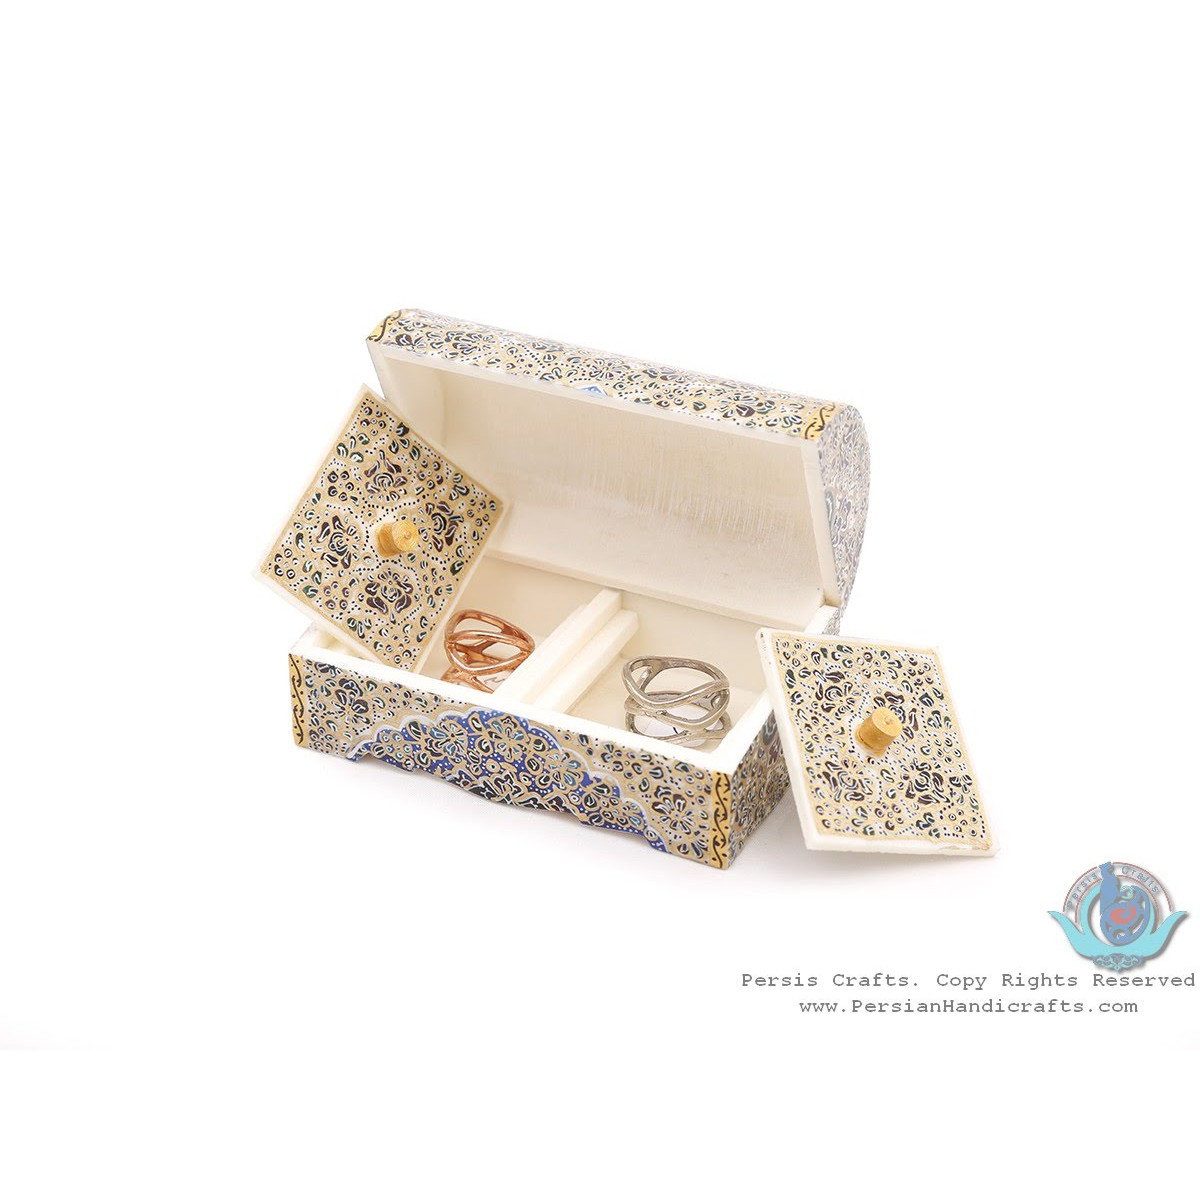 Tazhib Miniature Trunk Shape Jewelry Box with 2 Storages - HM3921-Persian Handicrafts